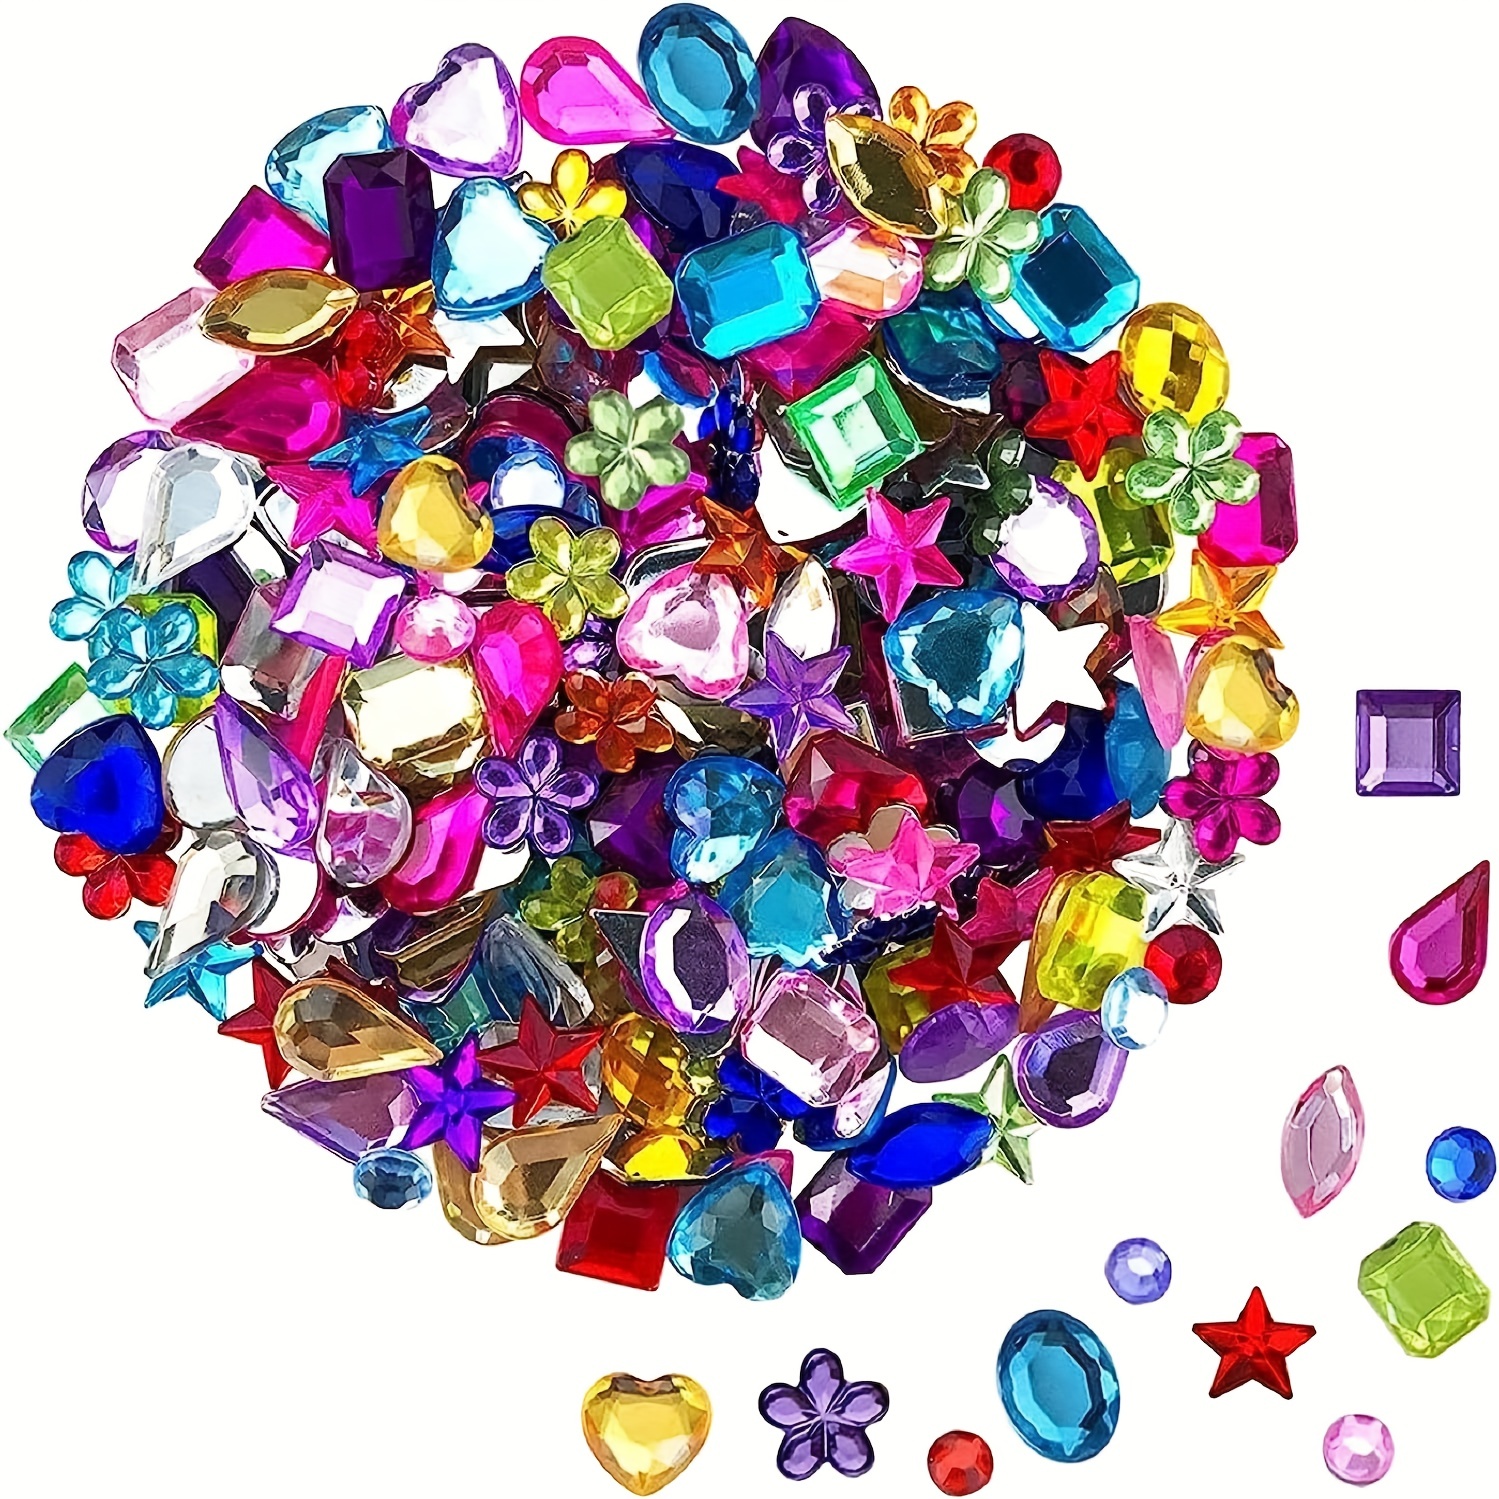 5 Sheets Jewels Stickers Self-Adhesive Craft Jewels and Gems Assorted Size  Crystal Gem Flatback Sticker Mixed Shapes Rhinestone for Crafts Bling Jewel